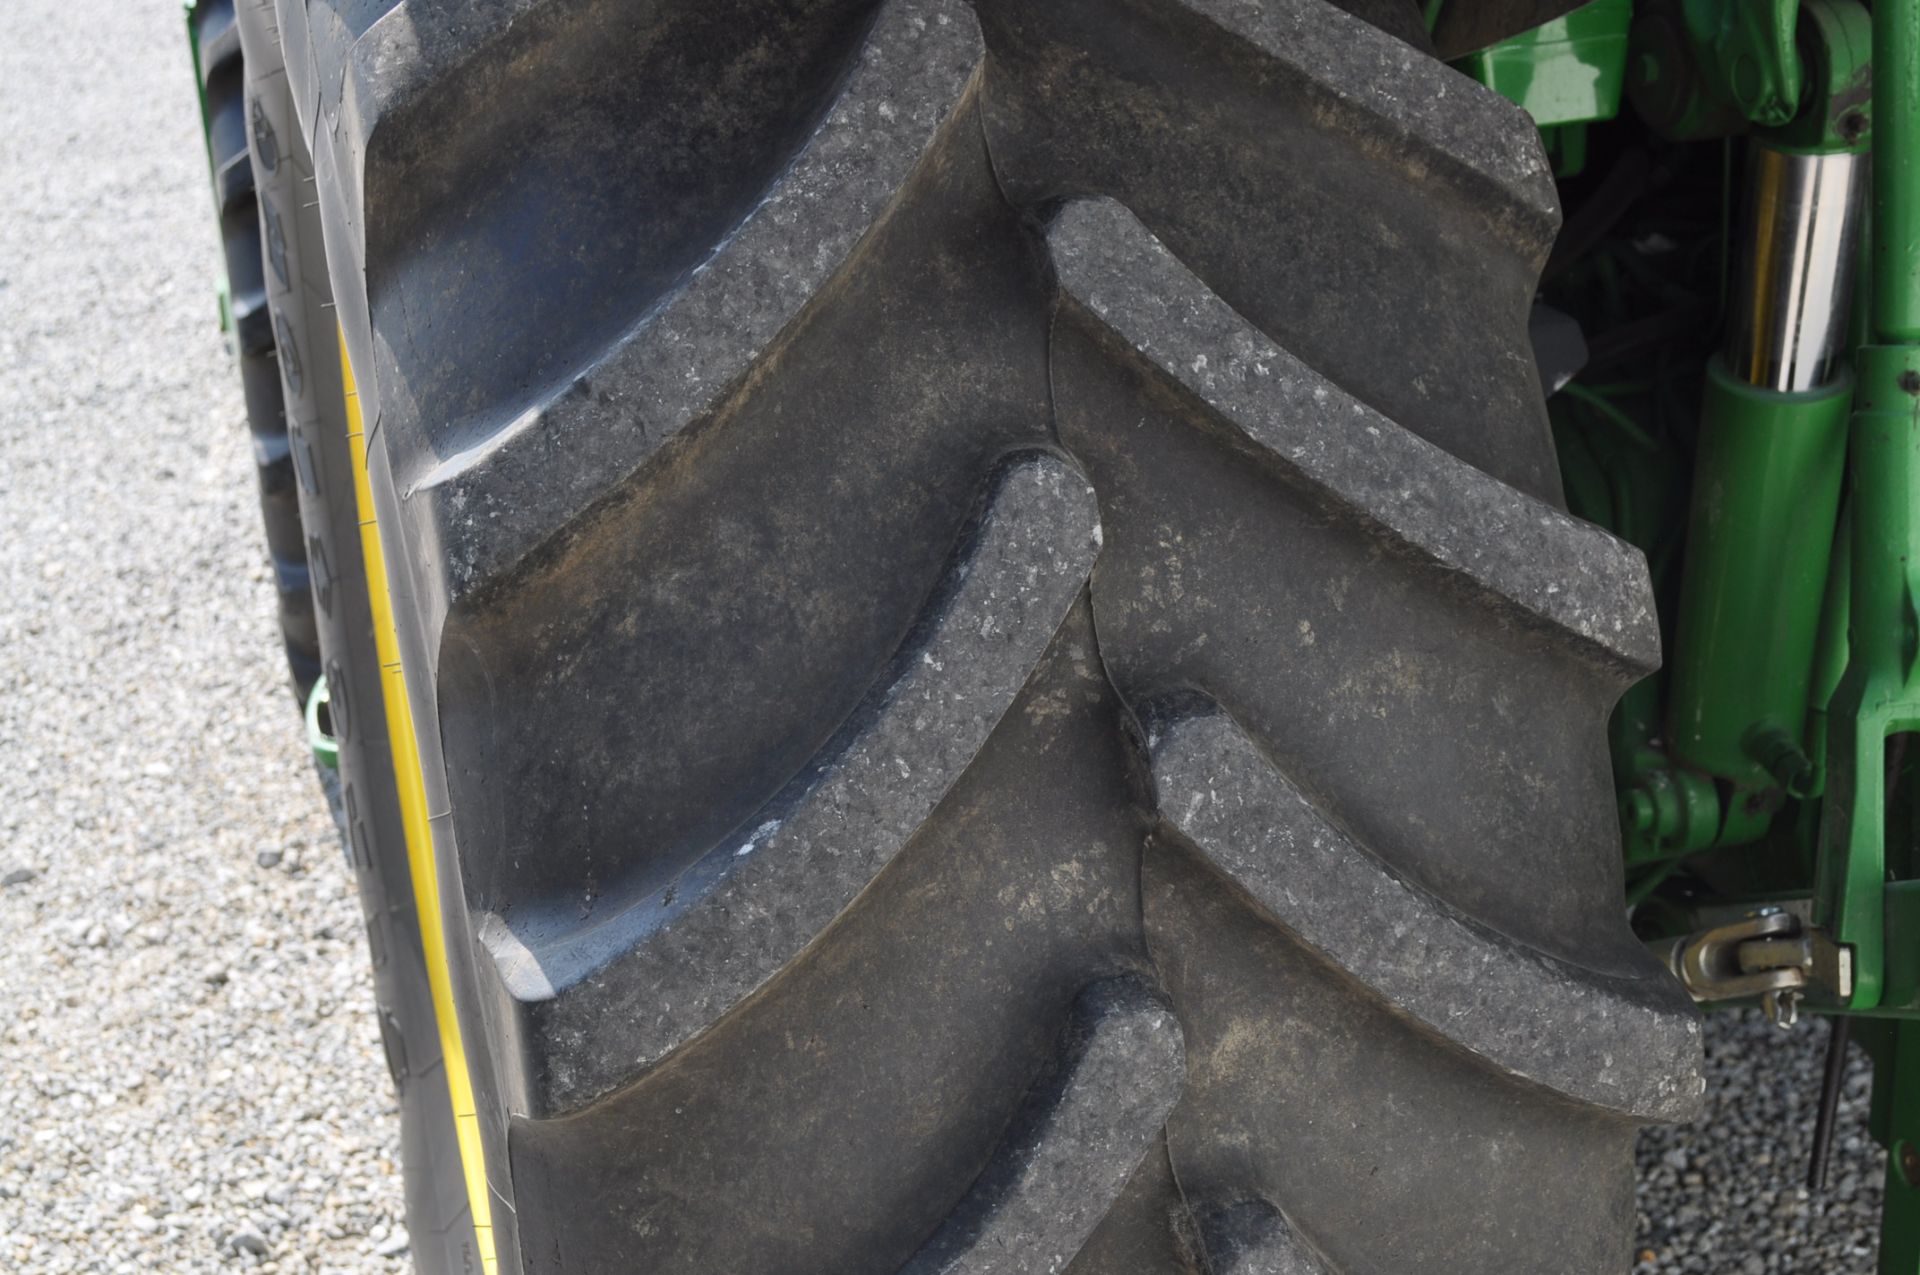 John Deere 6430 Premium tractor, MFWD, CHA, 600/65R38 rear, 540/65R24 front, IVT, front susp. - Image 8 of 18